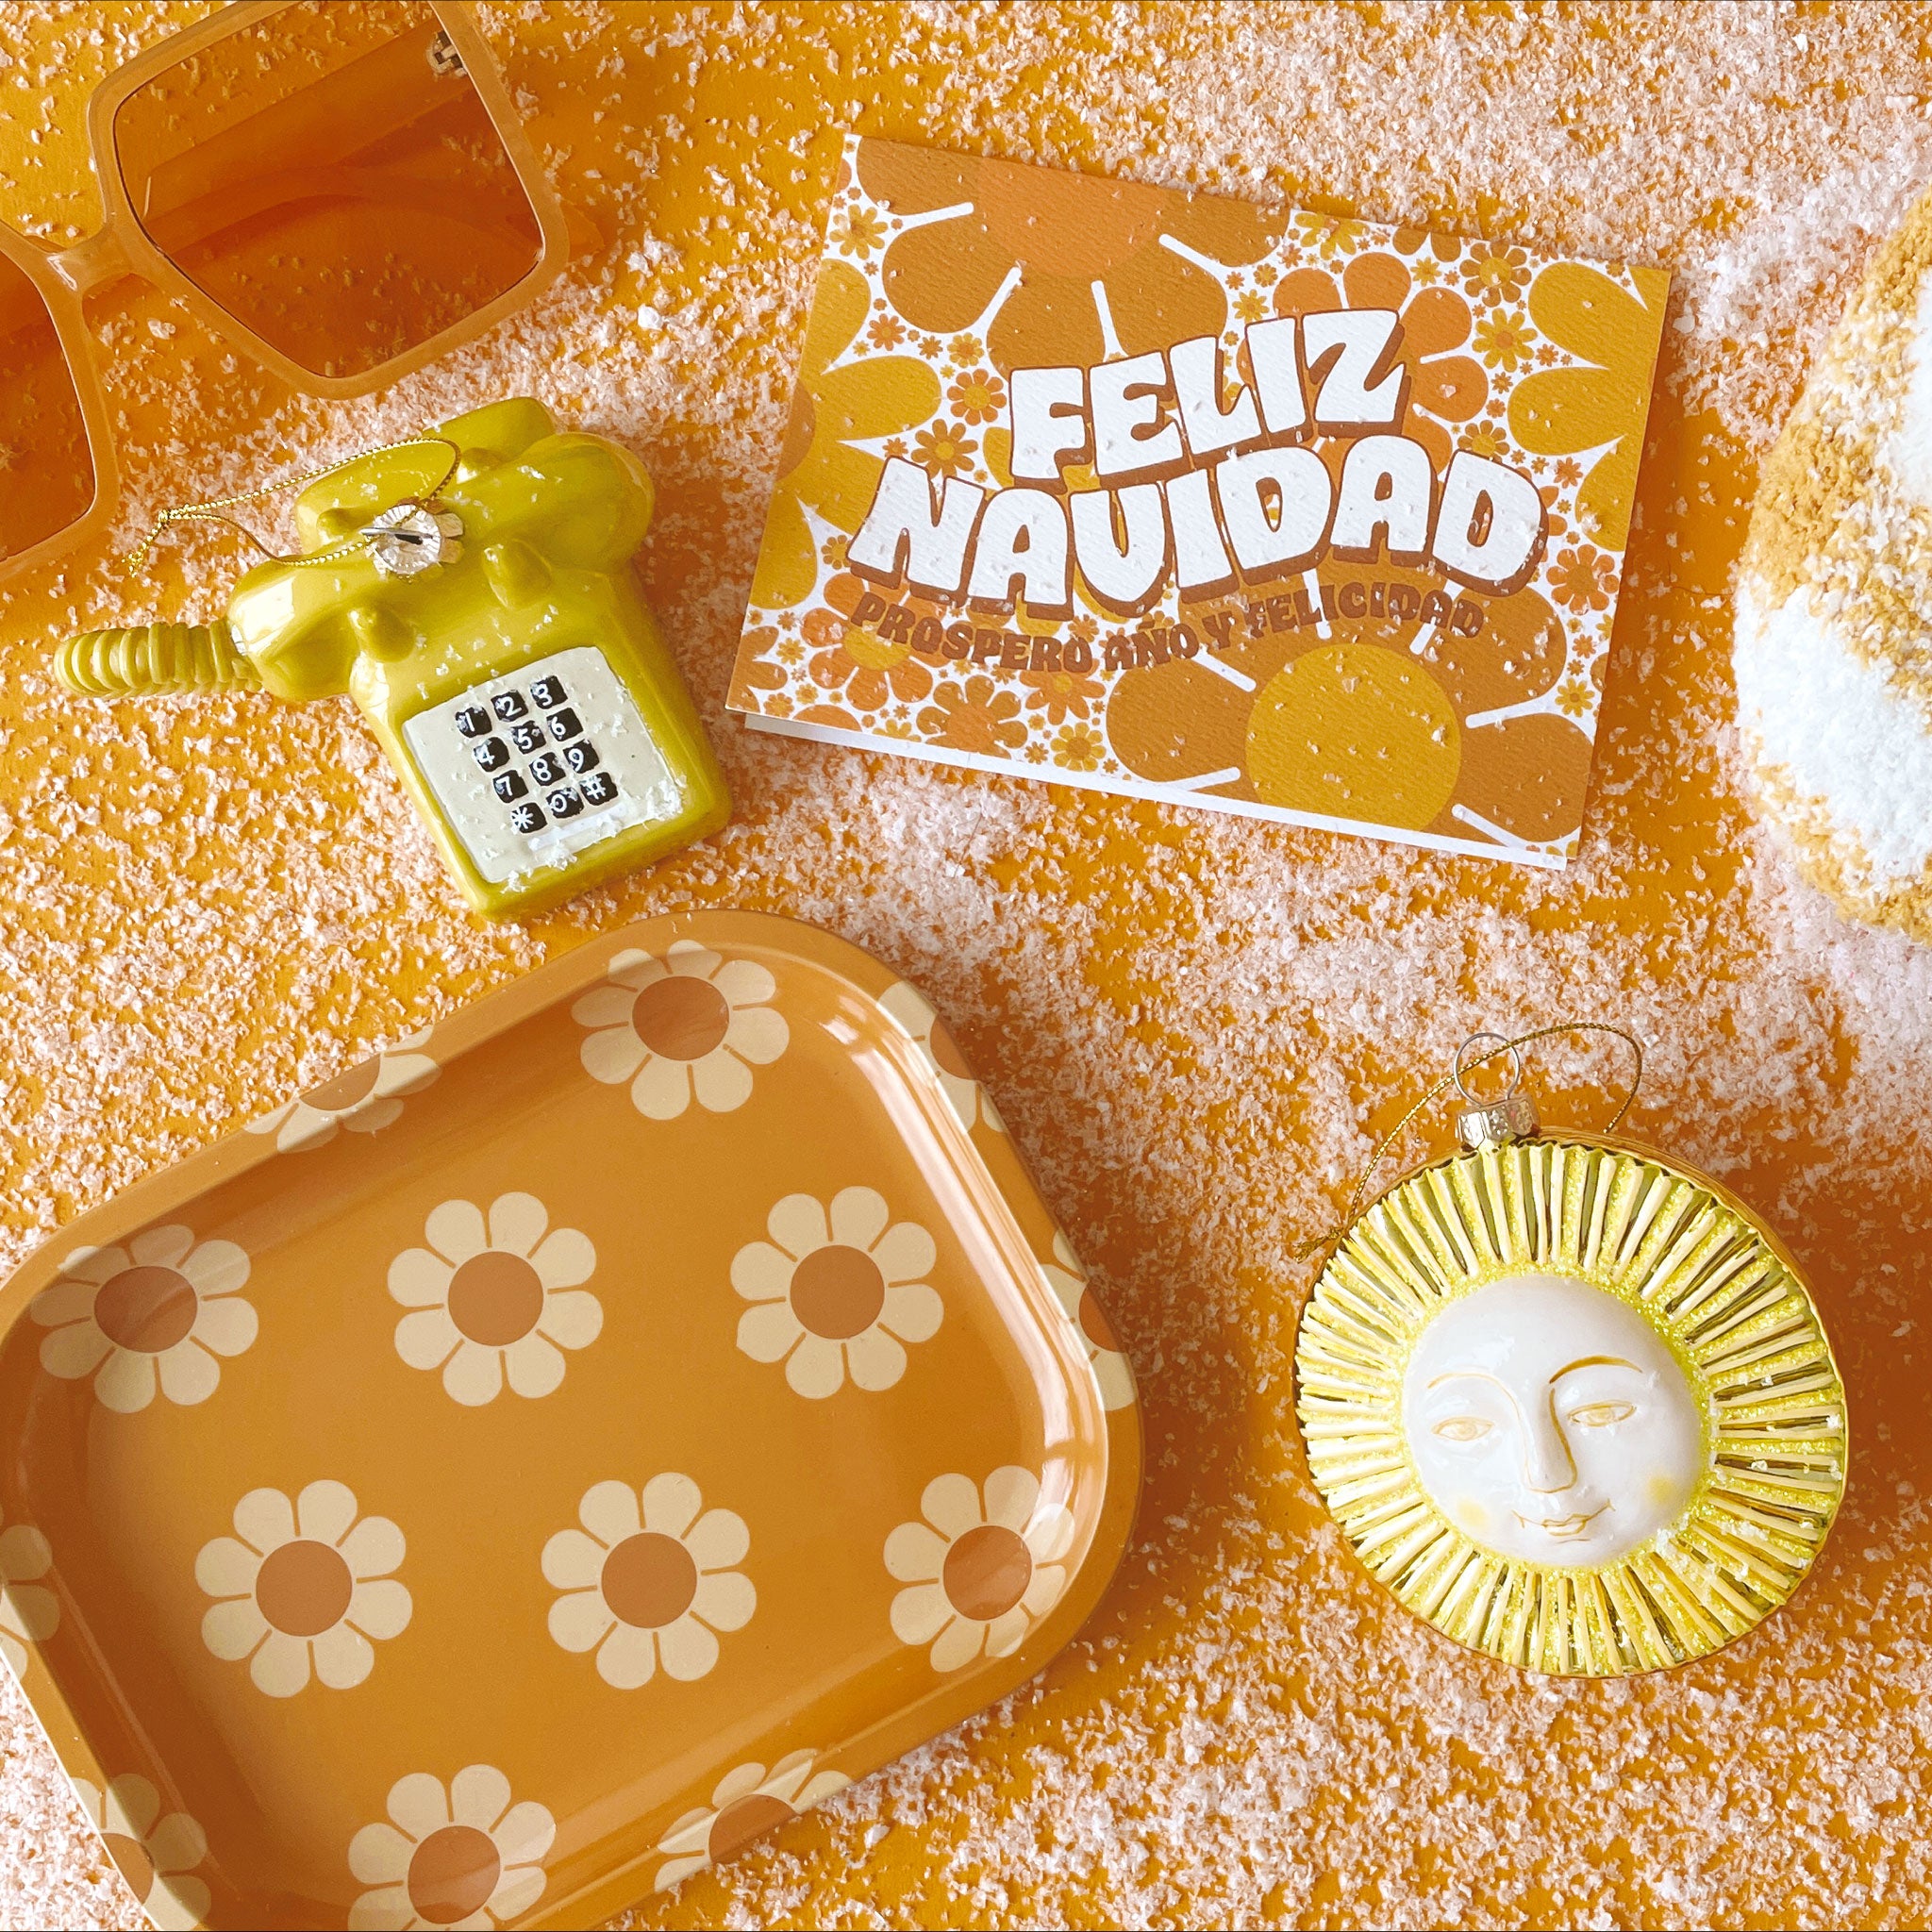 Greeting card filled with yellow and orange retro flower print. The card reads &#39;Feliz Navidad&#39; in white curved bubble letters. Below reads &#39;prosper año y felicidad&#39; in rust colored lettering. The card is accompanied by a solid white envelope. Card is surrounded by a glass sun ornament, glass yellow/green vintage phone ornament, a flower tray and a pair of Kelso sunglasses.